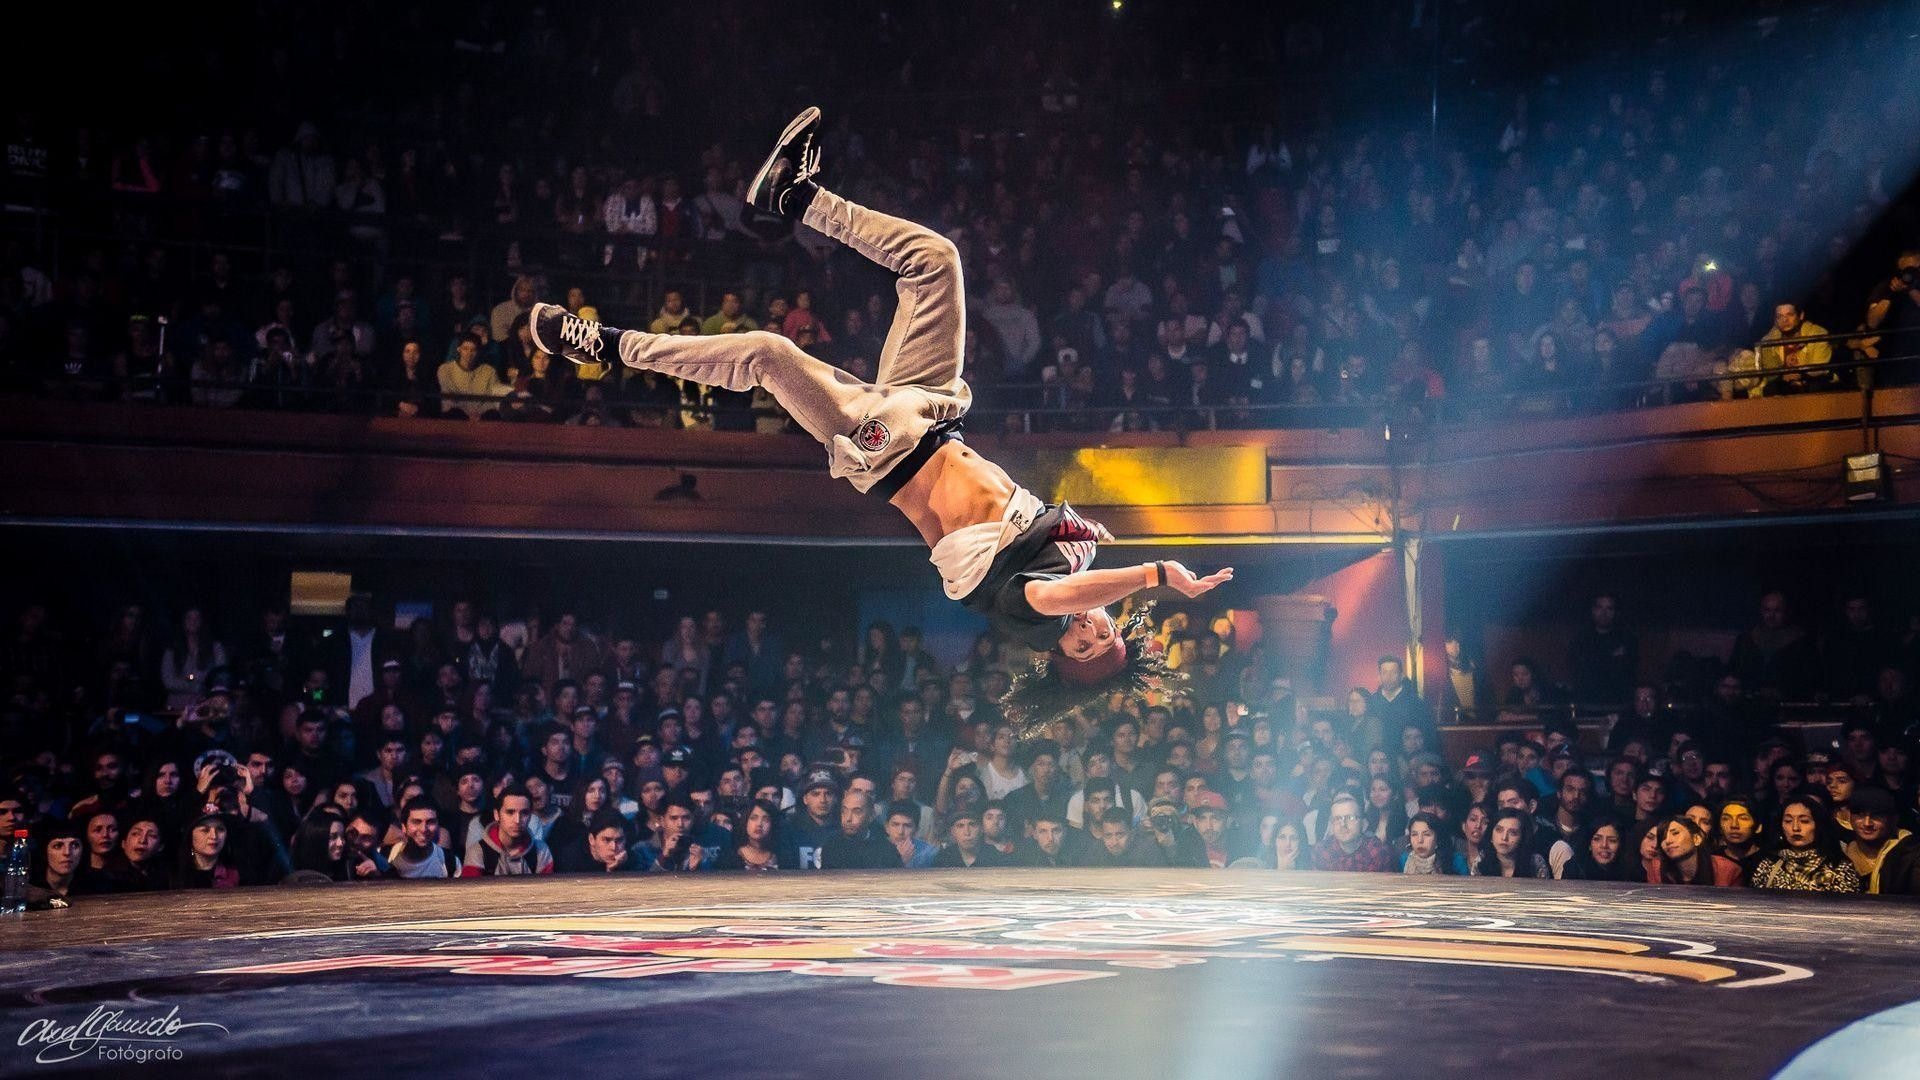 Breakdancing: Red Bull BC One competition, Street dancer, Athletic dancing. 1920x1080 Full HD Wallpaper.